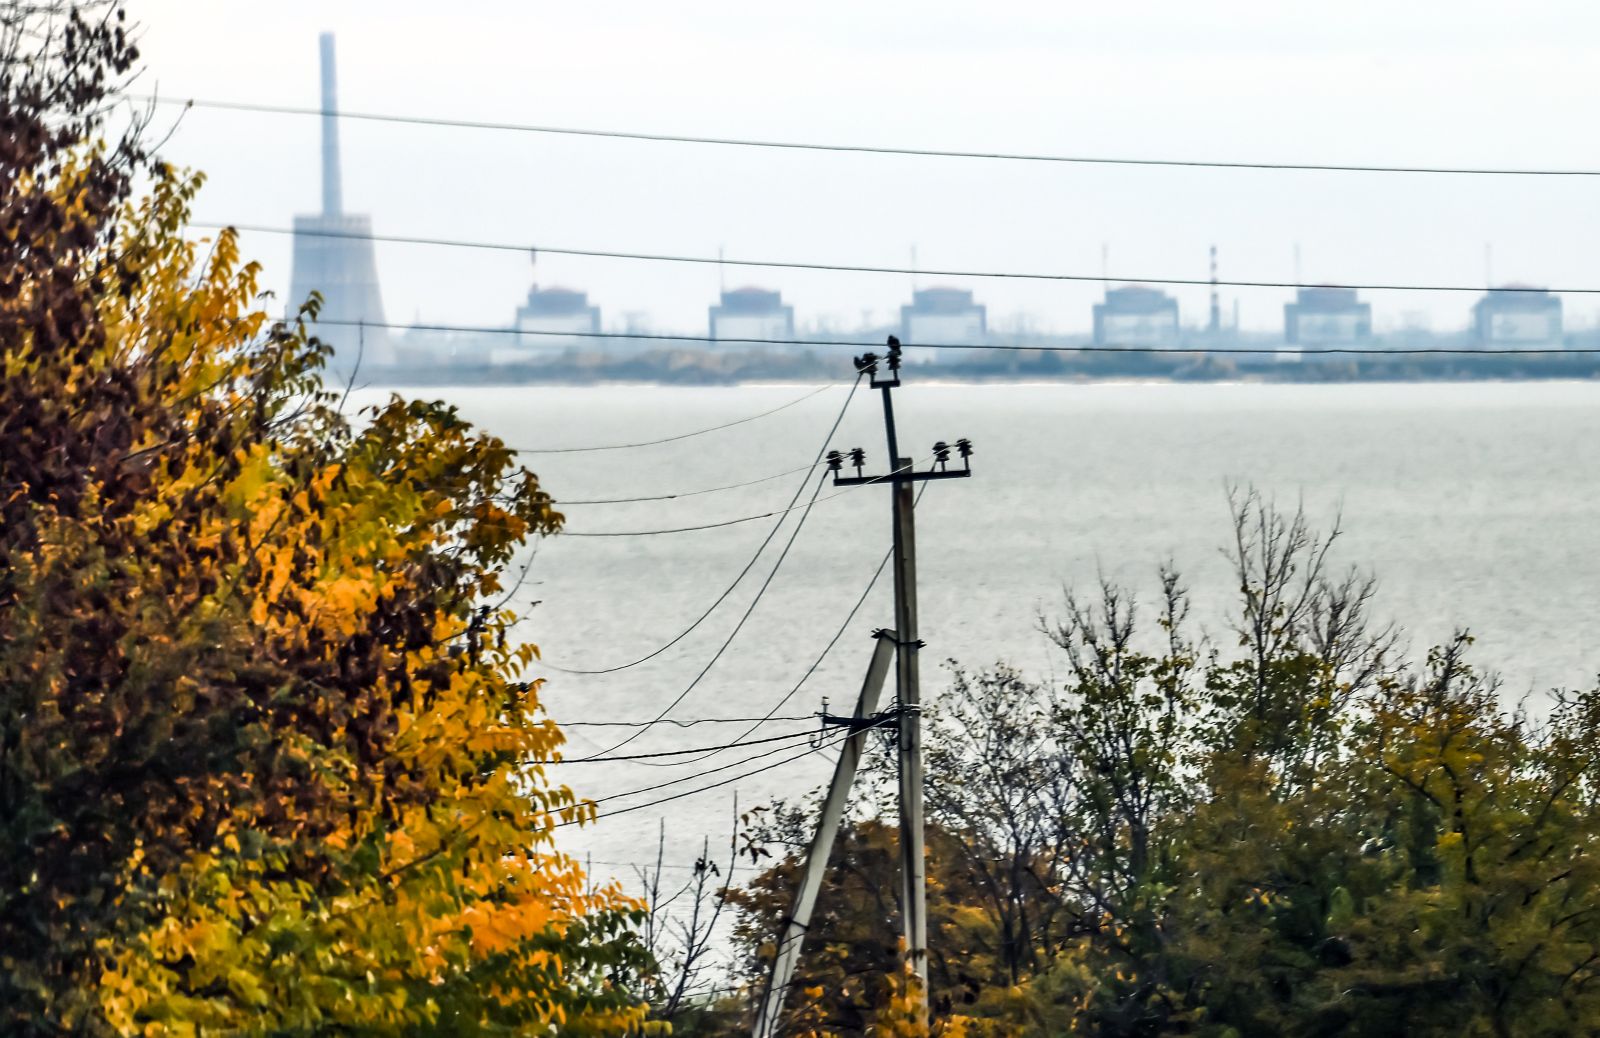 epa10271117 The Zaporizhzhia nuclear power plant (ZNPP) is seen from Nikopol, Ukraine, 28 October 2022. According to a statement by IAEA director general chief Grossi from 28 October 2022, engineers at the ZNPP have been working to stabilize the facility’s external power supplies. The plant has received the power needed to cool the reactors "directly and without interruption from the national grid," the nuclear watchdog's chief said. Russian troops on 24 February entered Ukrainian territory, starting a conflict that has provoked destruction and a humanitarian crisis.  EPA/HANNIBAL HANSCHKE